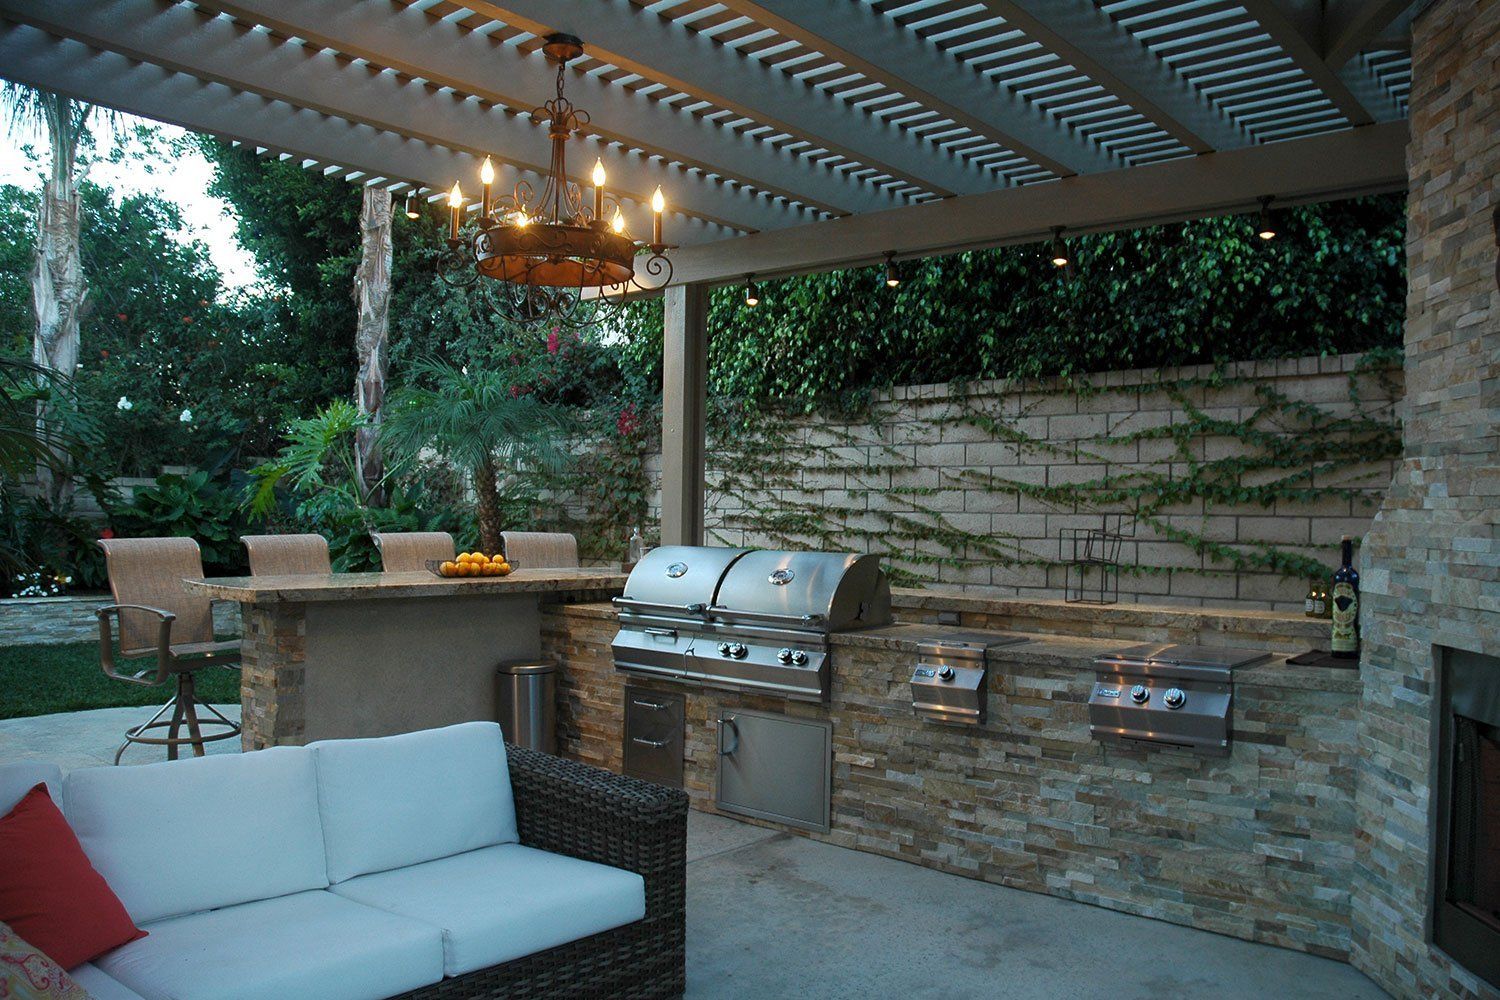 At Westside Remodeling, designing and building outdoor kitchens is one of our favorite projects